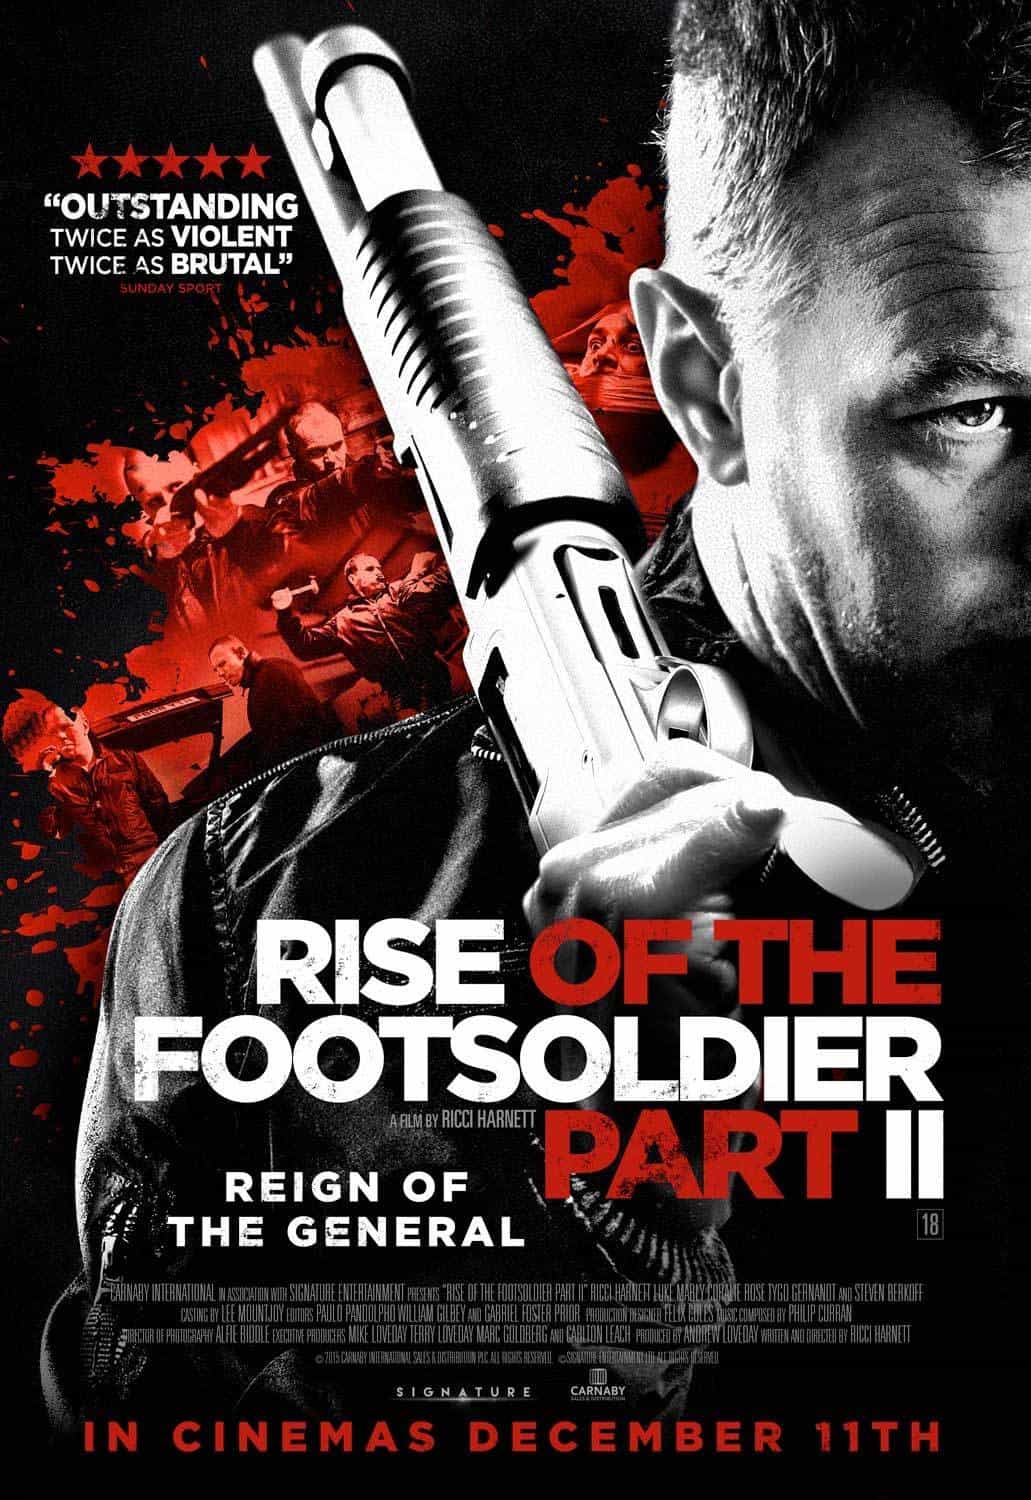 UK Video Charts Weekending 10th January 2015:  Rise of the Footsoldier Part II climbs to the top